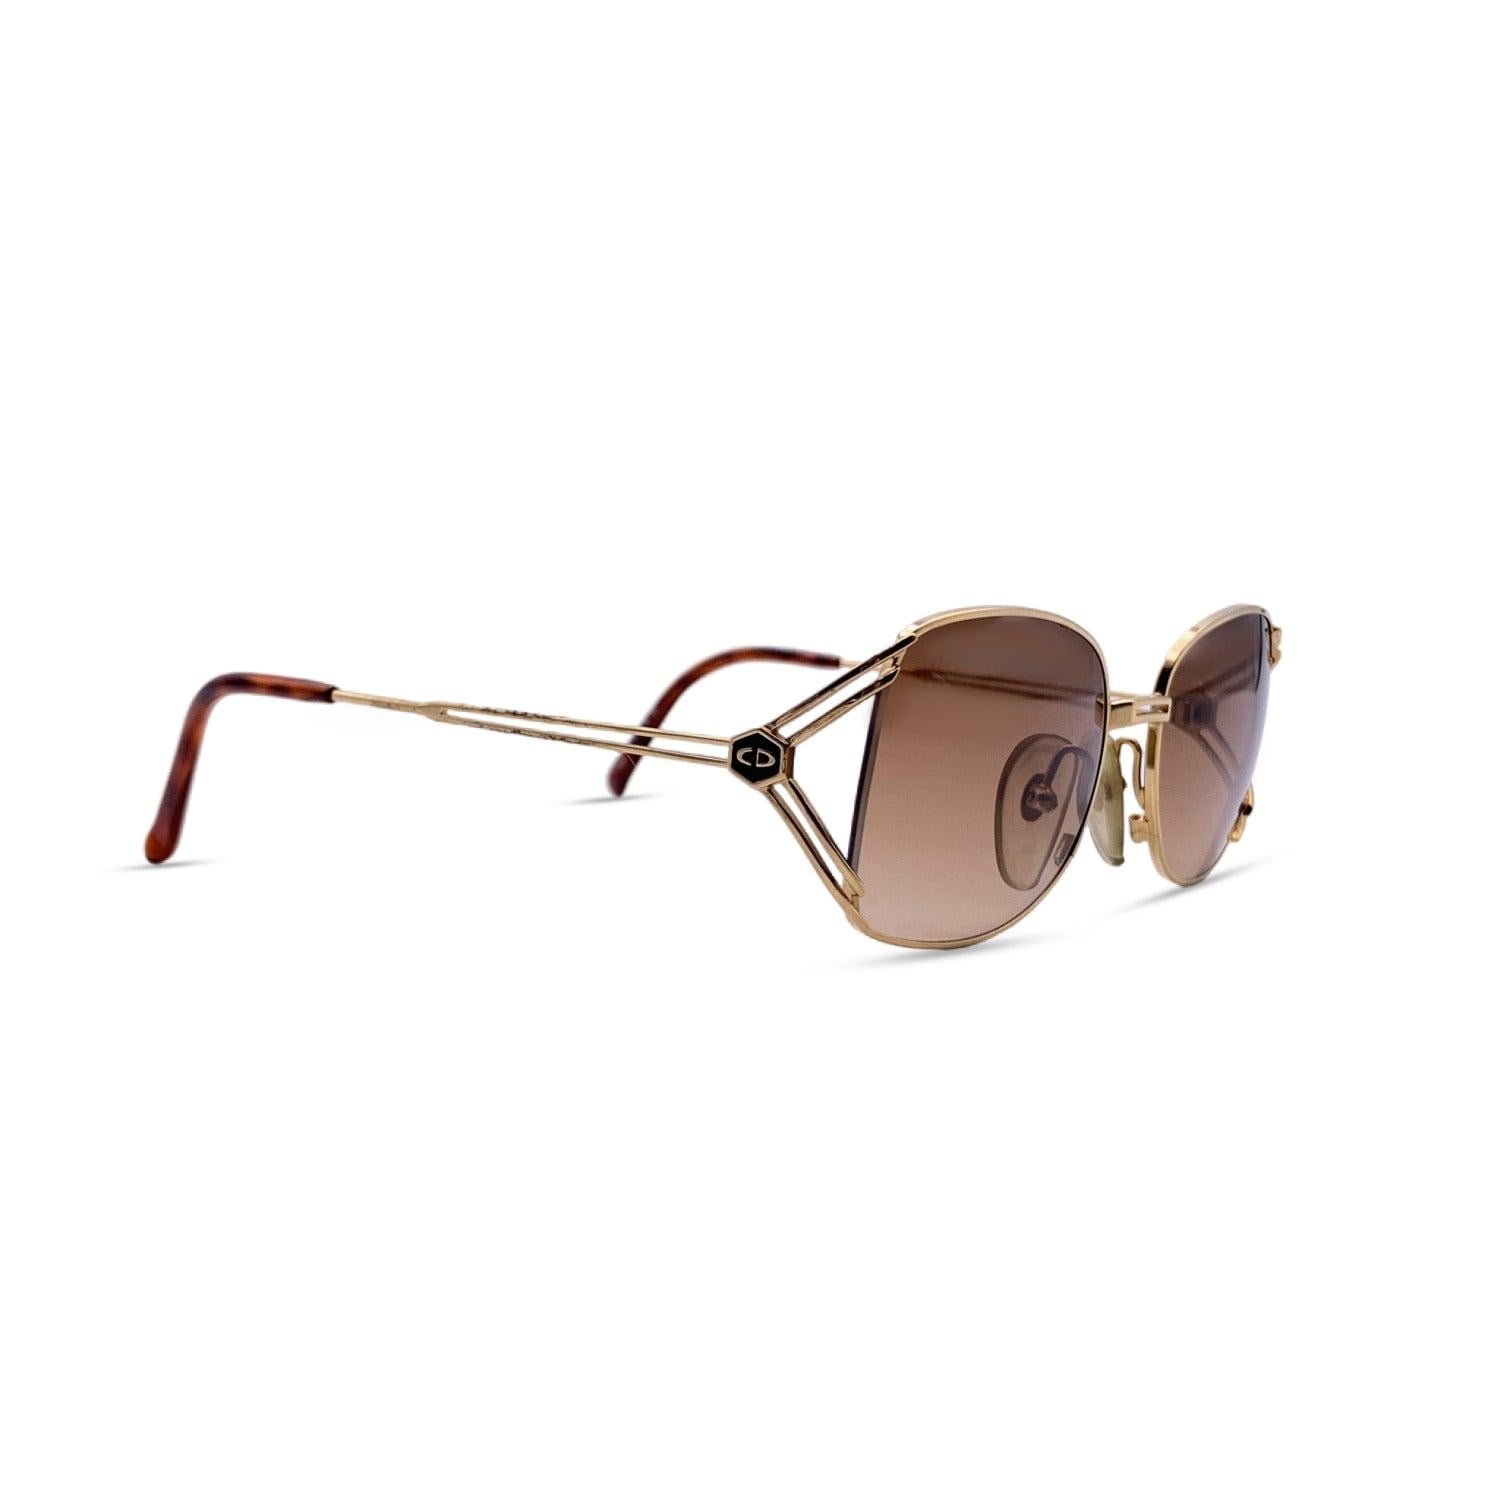 Vintage Christian Dior Women Sunglasses. Mod. 2694 40. Size: 50/18 130mm. Gold metal and red acetate on finish. 100% Total UVA/UVB protection. Brown gradient lenses. CD logos on the side of the temples. Details MATERIAL: Metal COLOR: Gold MODEL: